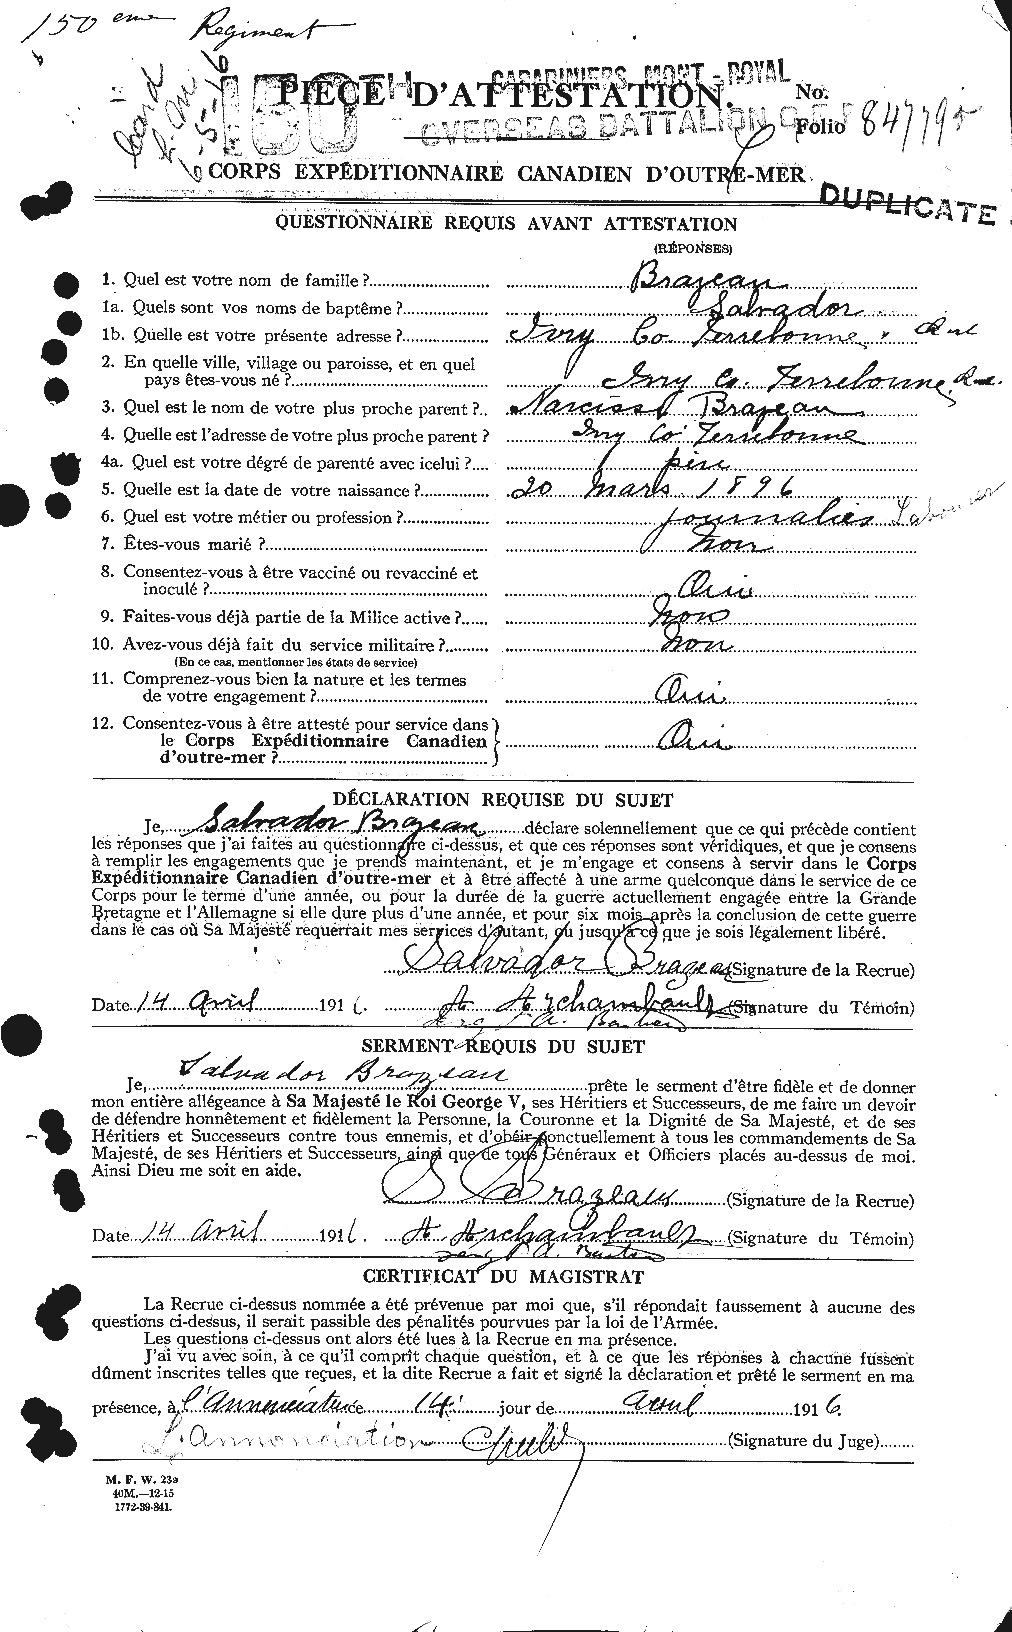 Personnel Records of the First World War - CEF 262448a